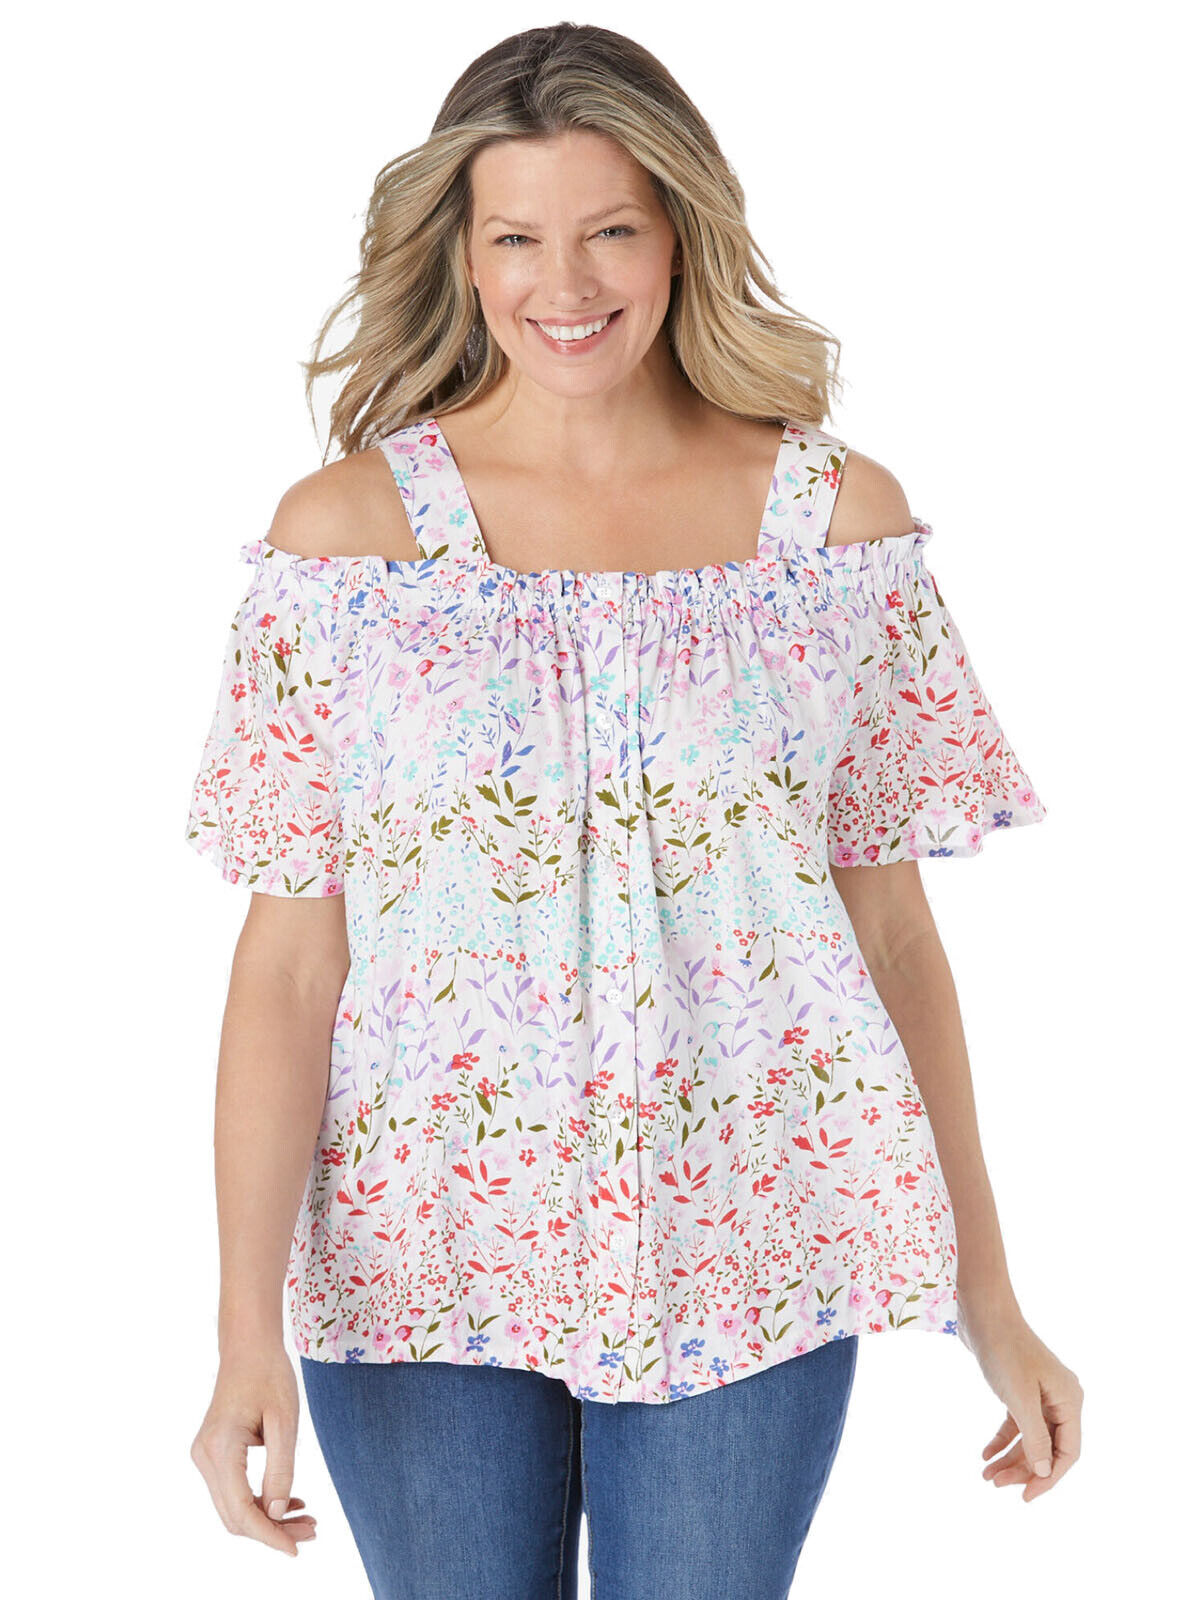 Woman Within Garden Cold Shoulder Blouse 16/18 20/22 24/26 28/30 32/34 40/42